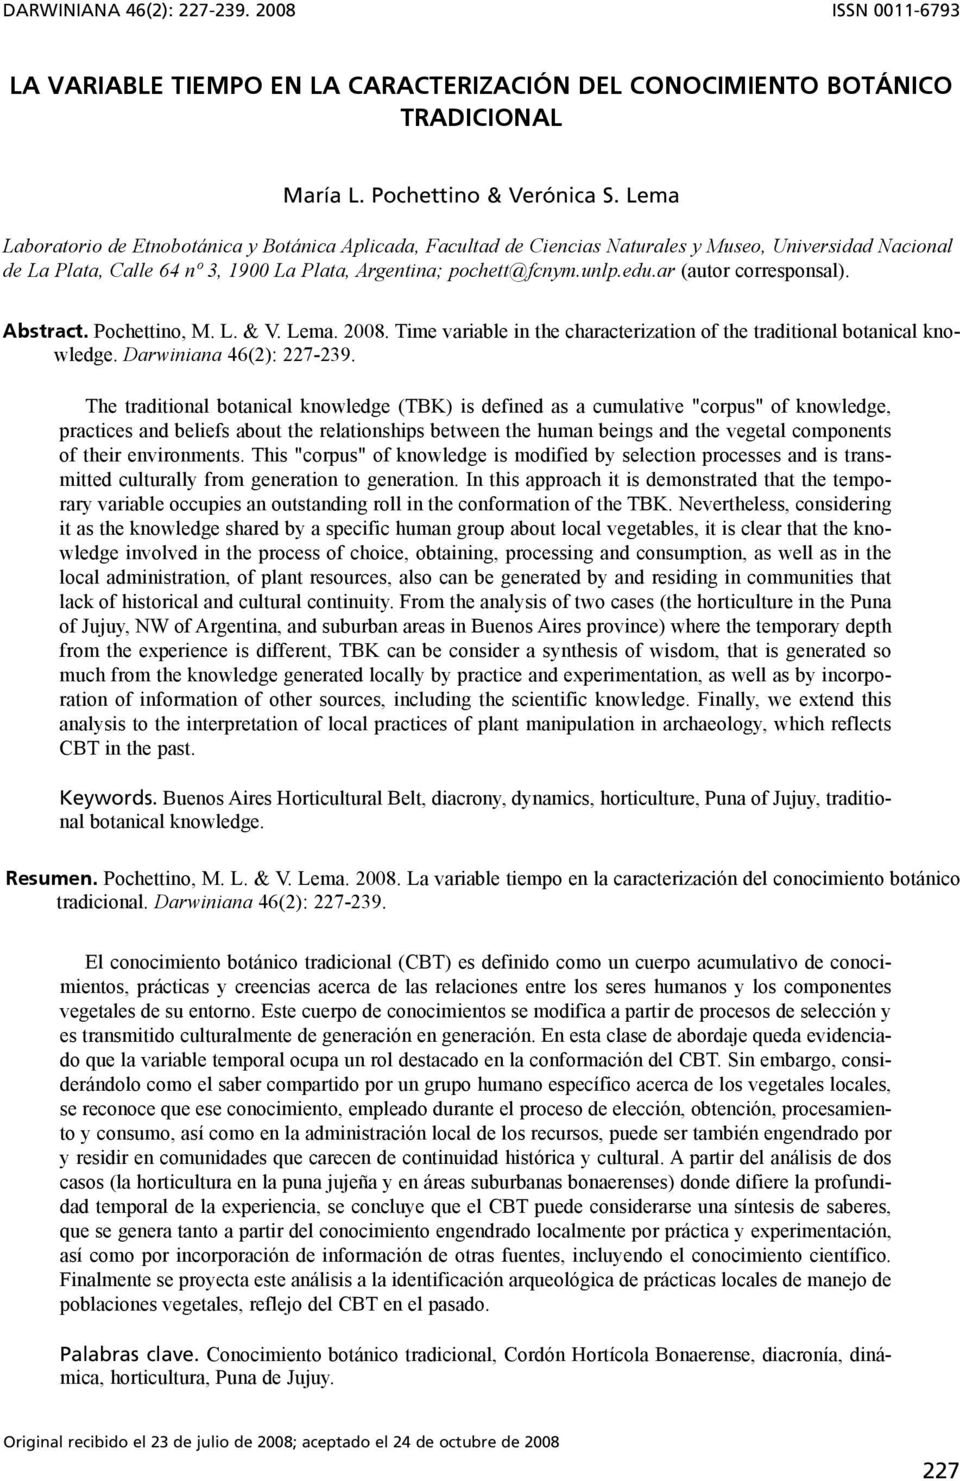 ar (autor corresponsal). Abstract. Pochettino, M. L. & V. Lema. 2008. Time variable in the characterization of the traditional botanical knowledge. Darwiniana 46(2): 227-239.